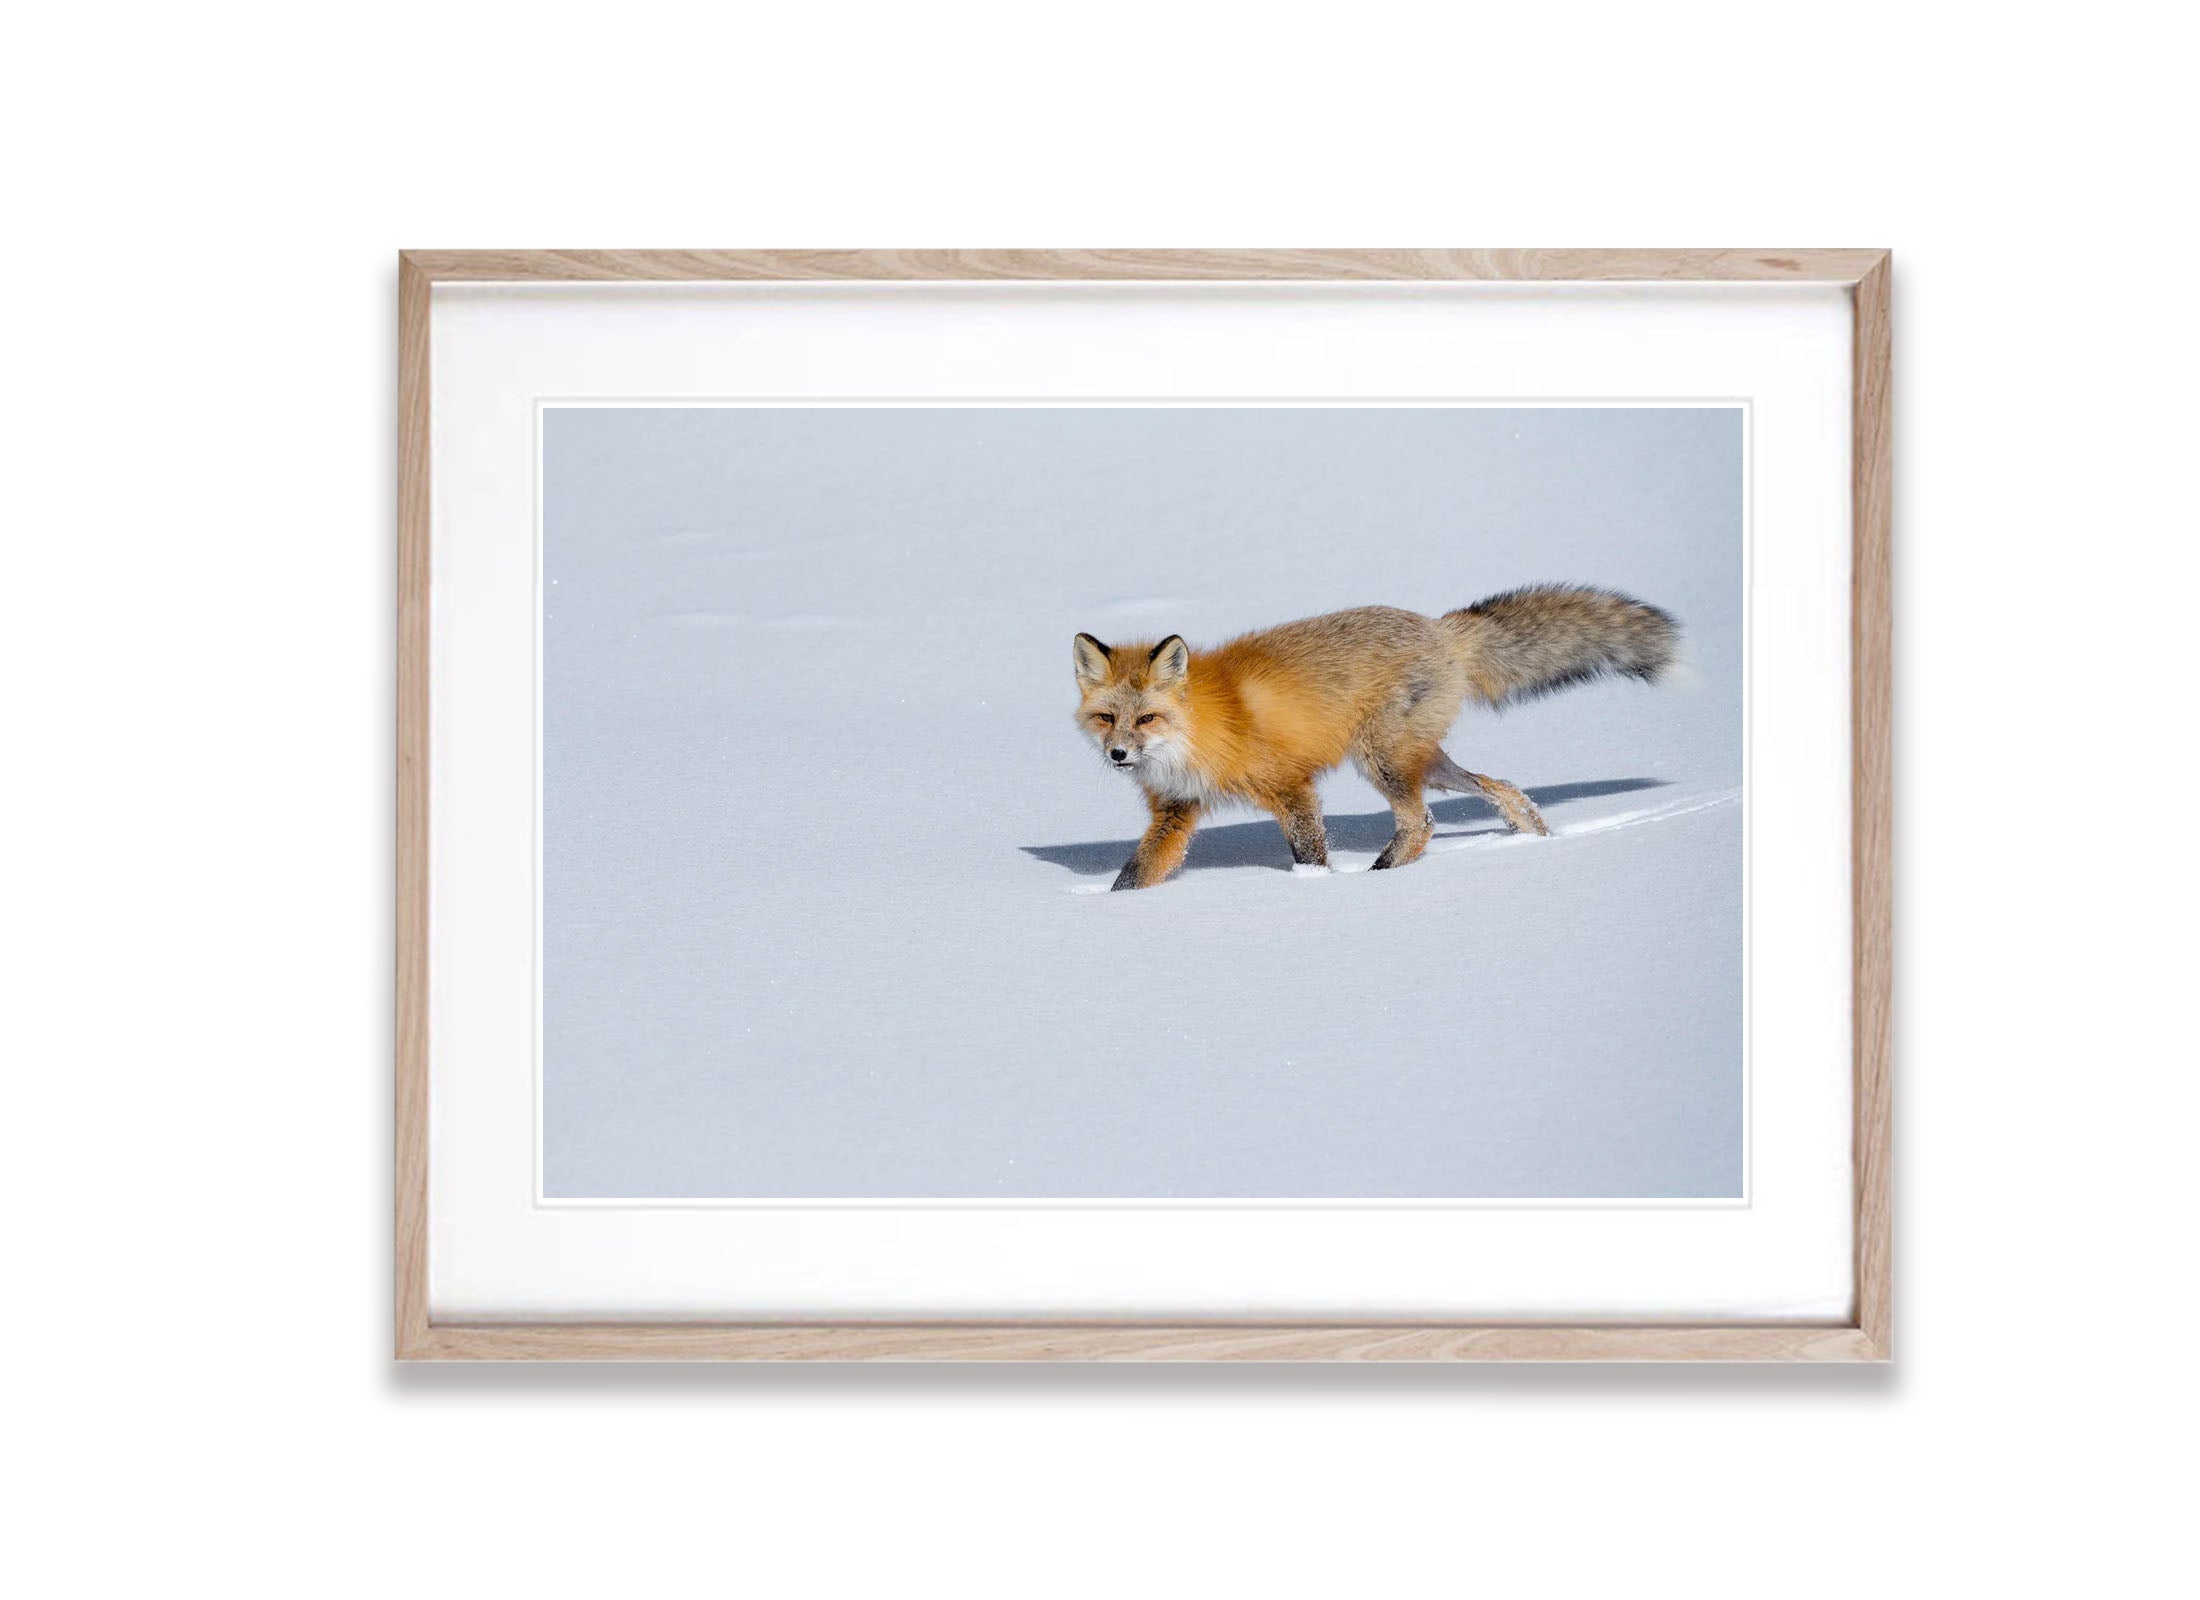 The Fox on The Prowl, Yellowstone NP